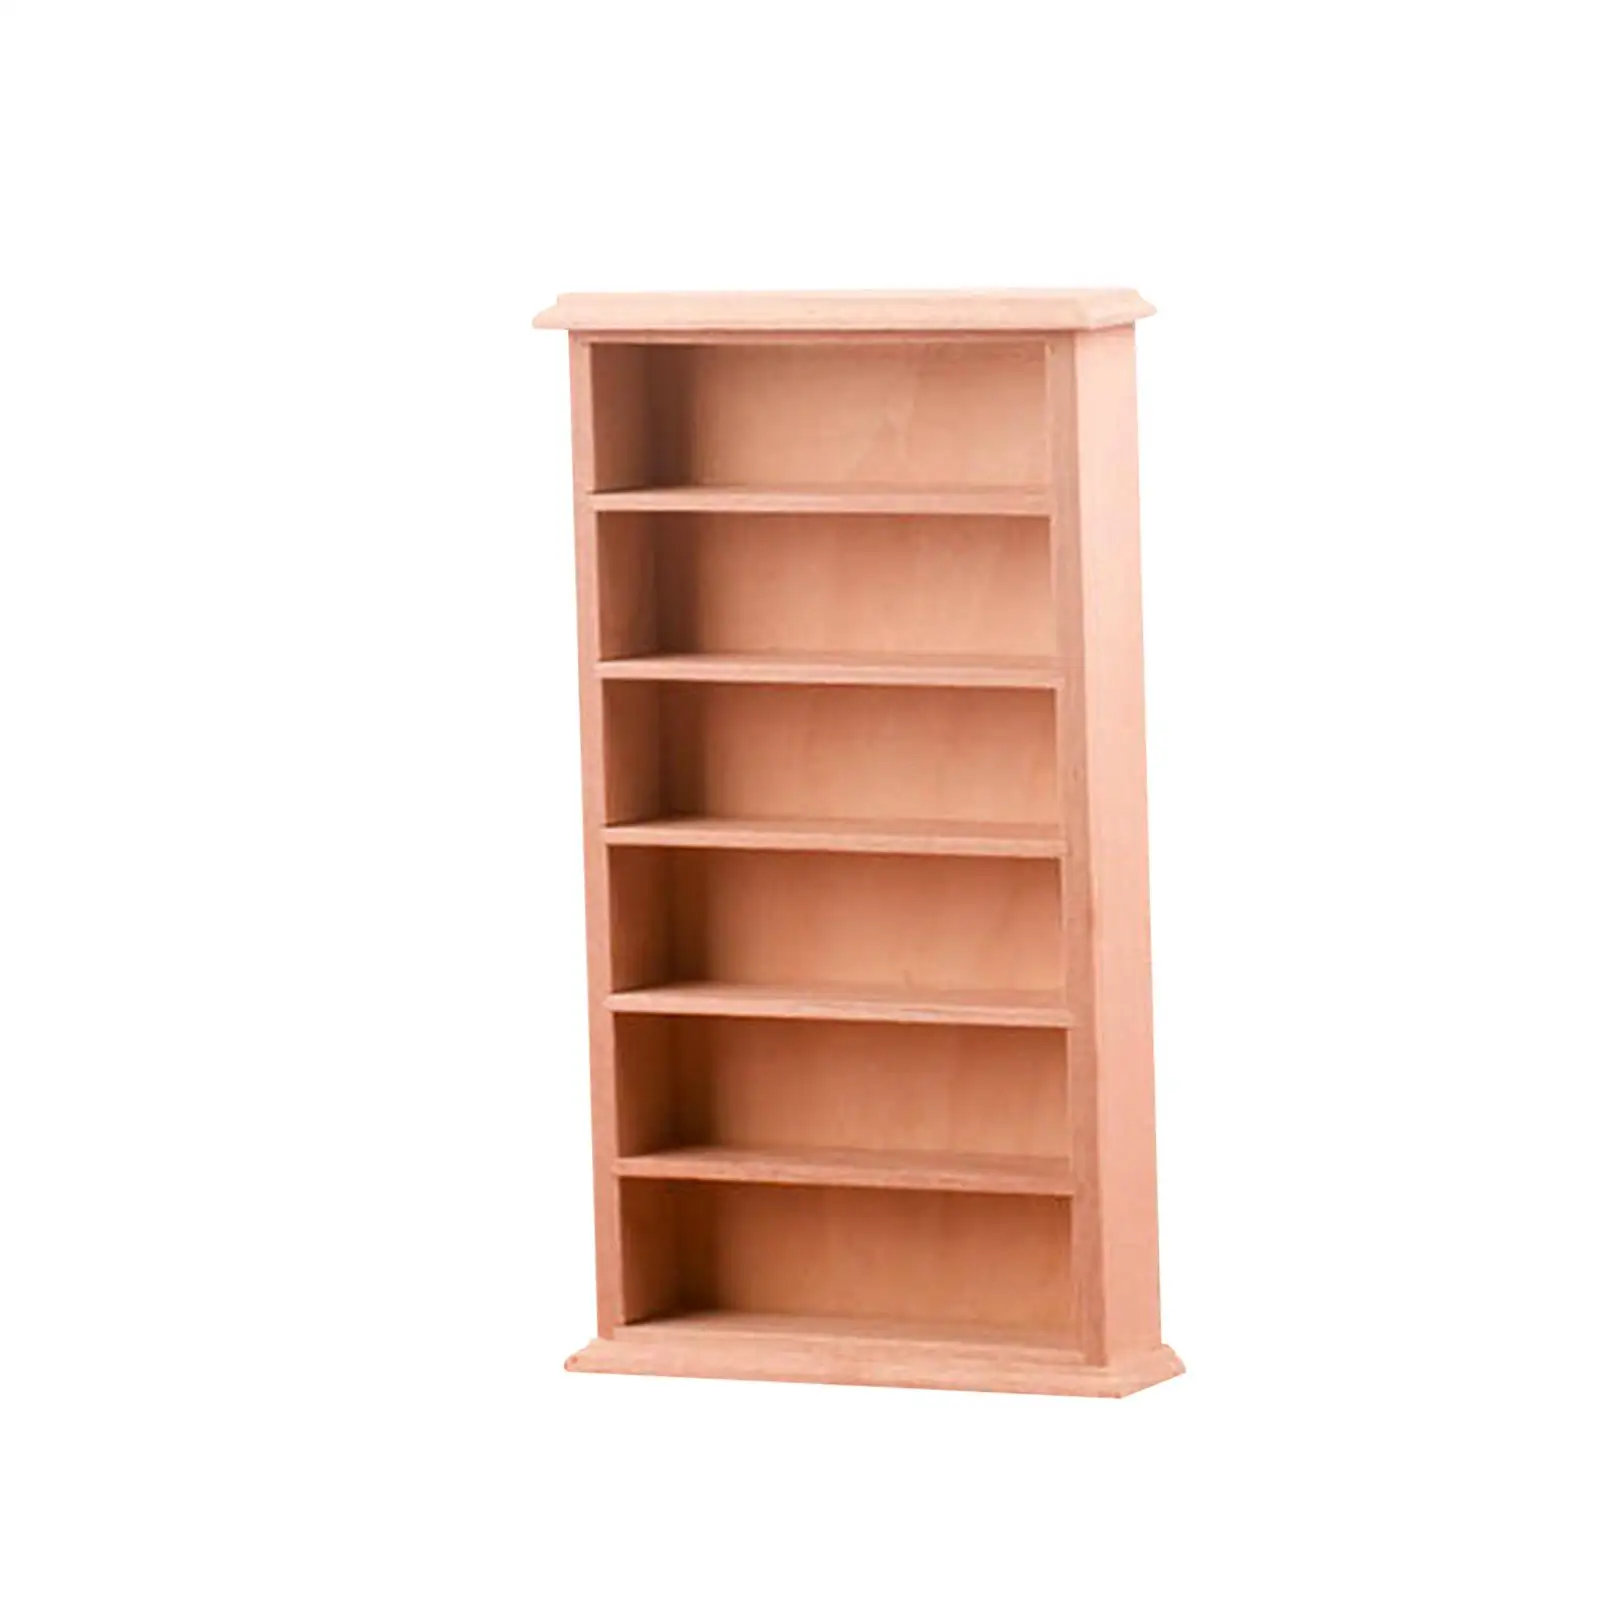 1:12 Wooden Display Shelf Life Scene Accessories Toys,Kitchen Bedroom Home Furniture,Simulation Dollhouse Bookcase Decoration